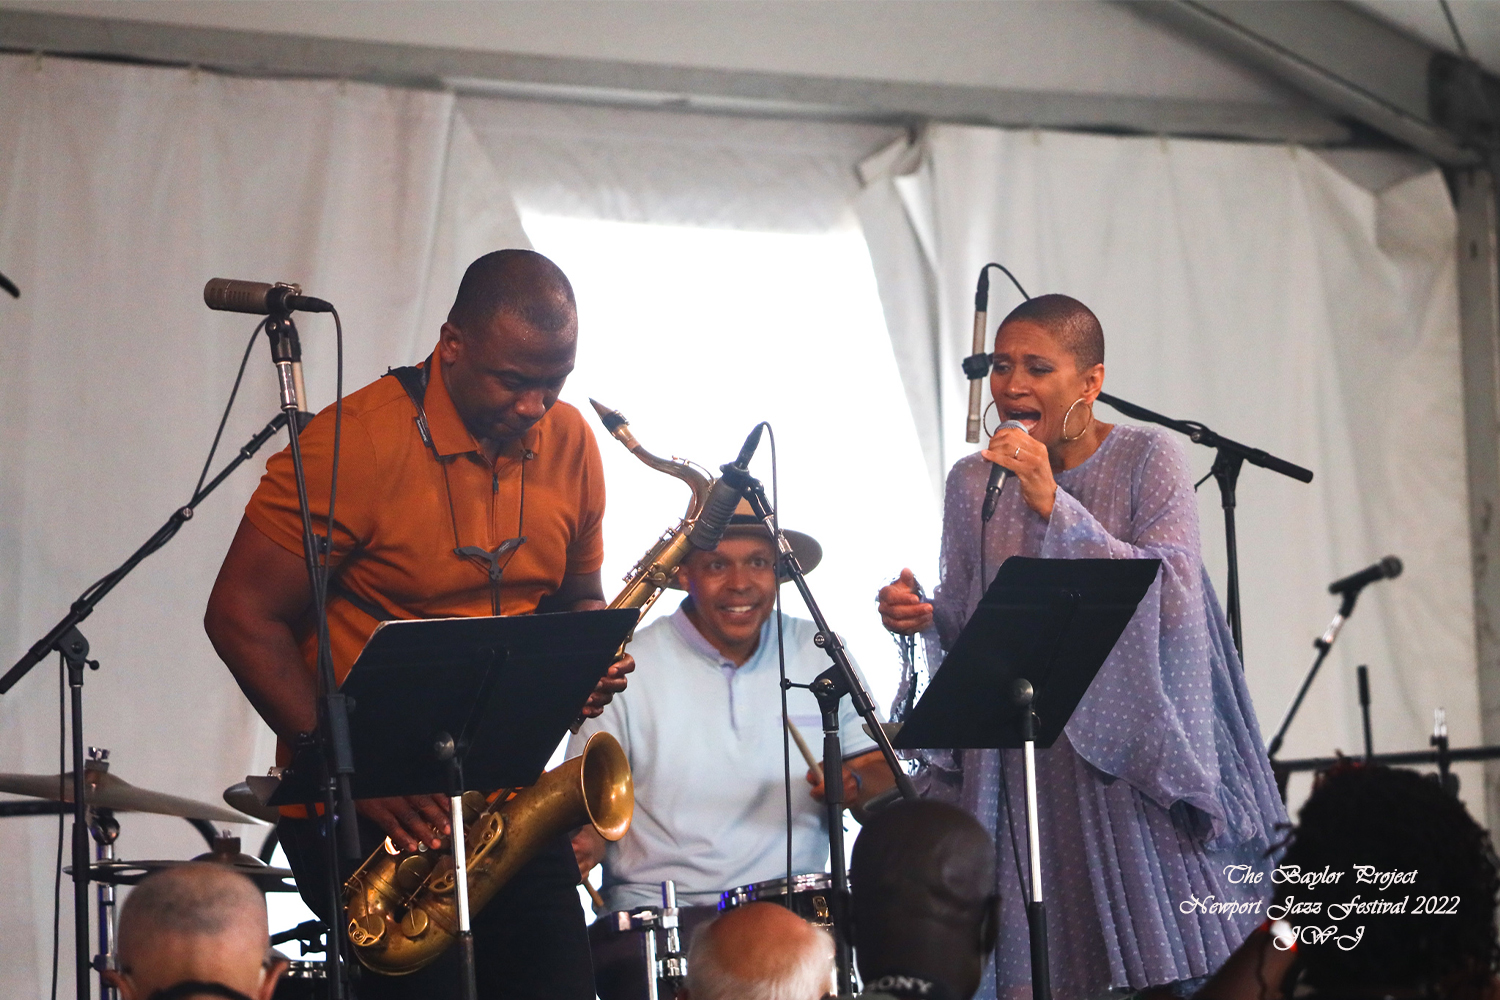 Full color shot of the Baylor Project on stage at the 2022 Newport Jazz Festival in Rhode Island